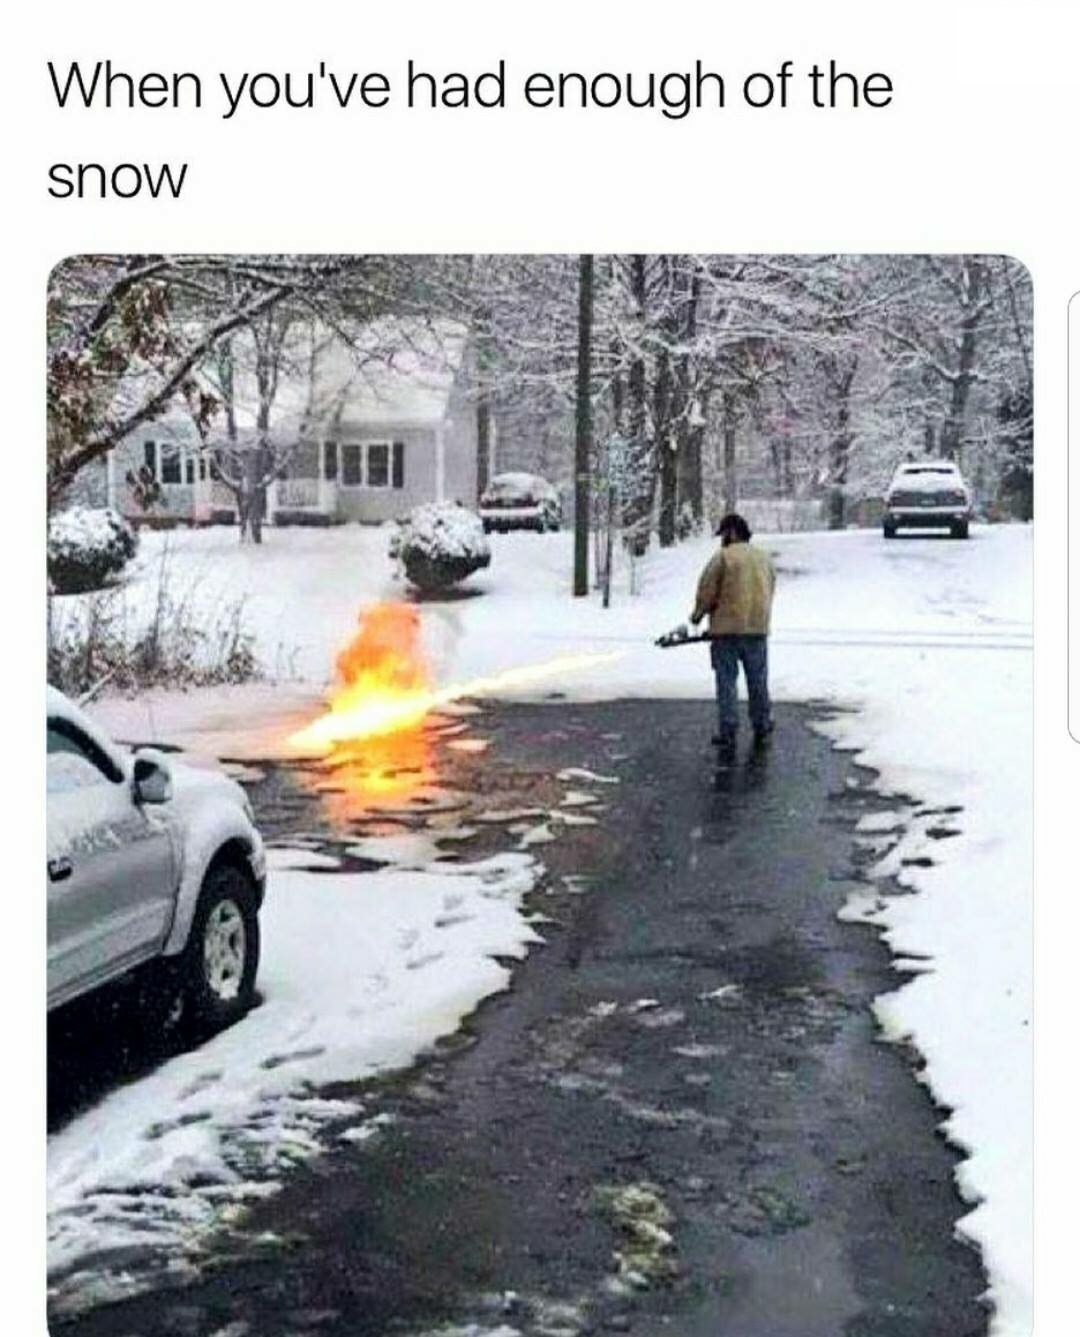 flame thrower snow - When you've had enough of the snow